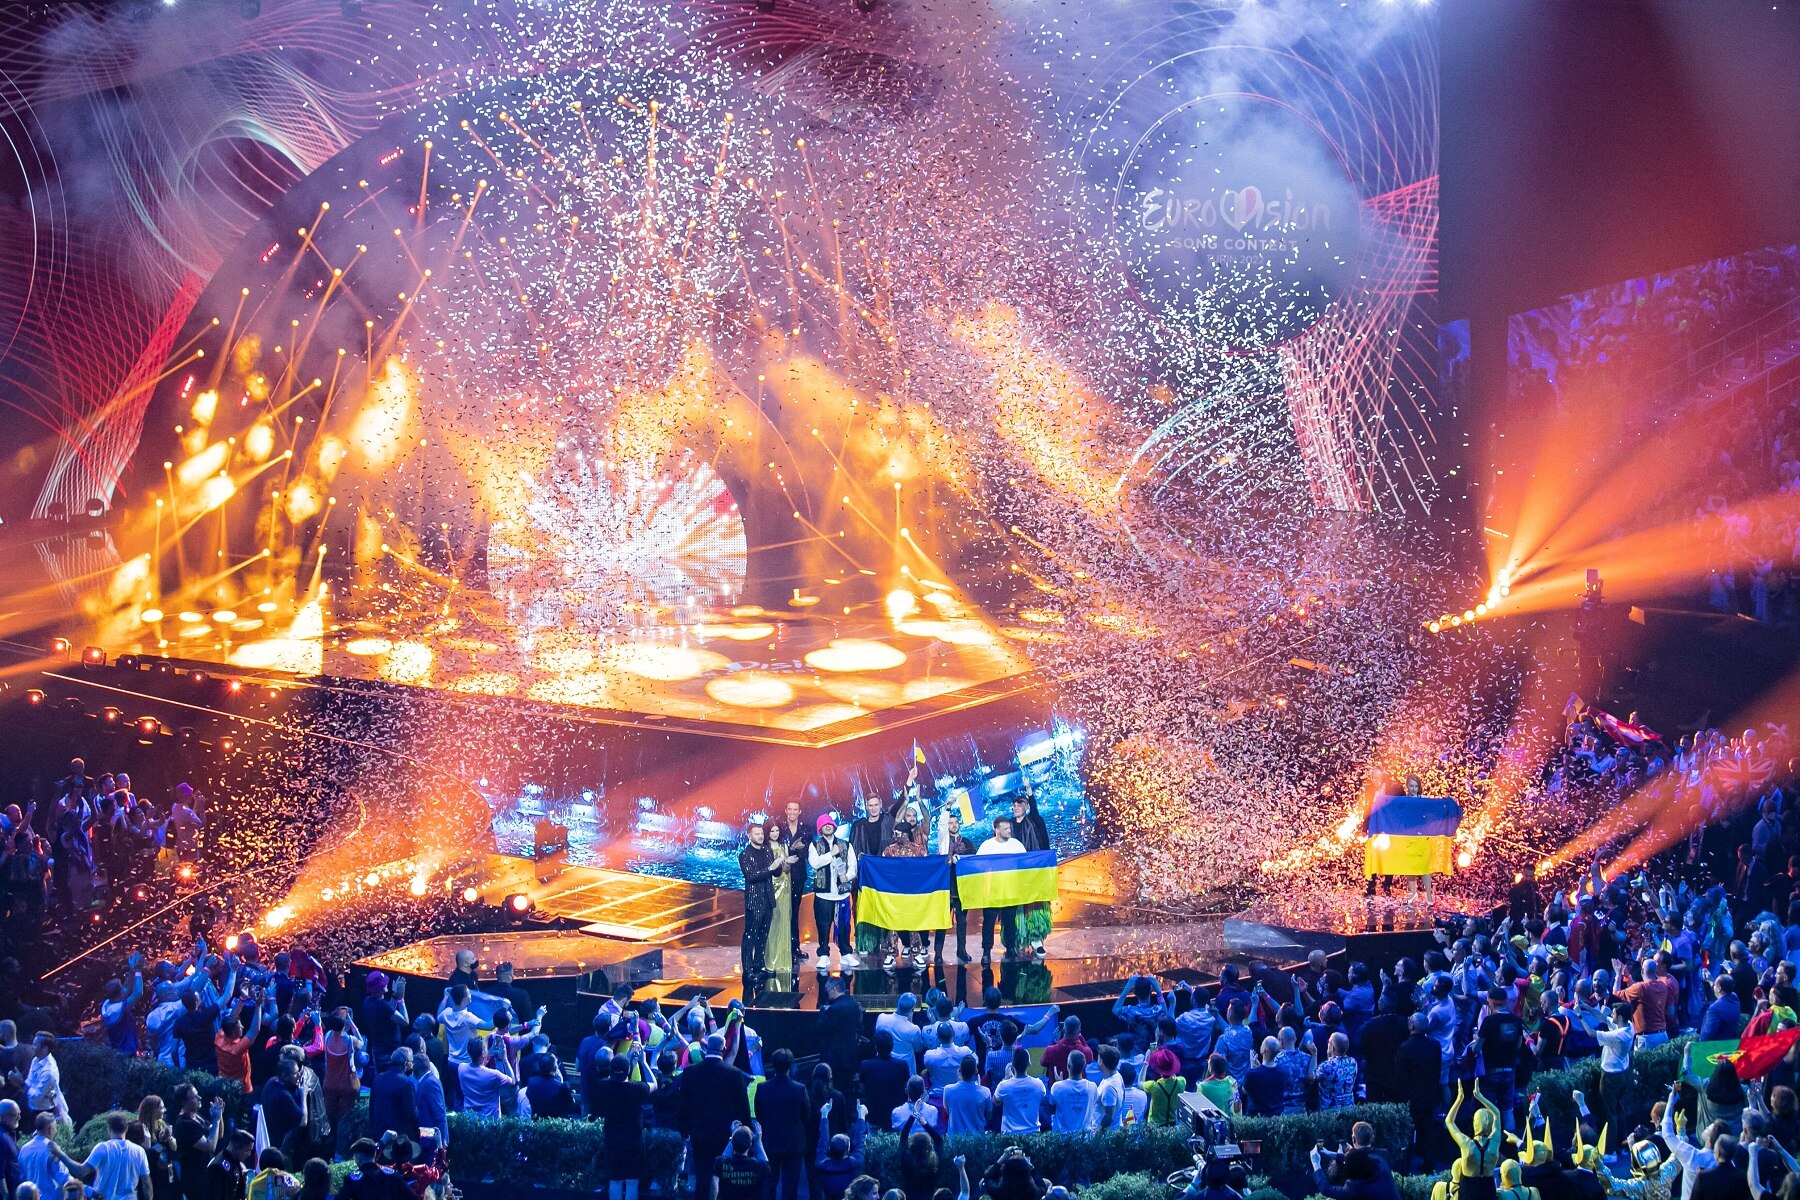 Kalush Orchestra for Ukraine wins the grand-final of Eurovision Song Contest